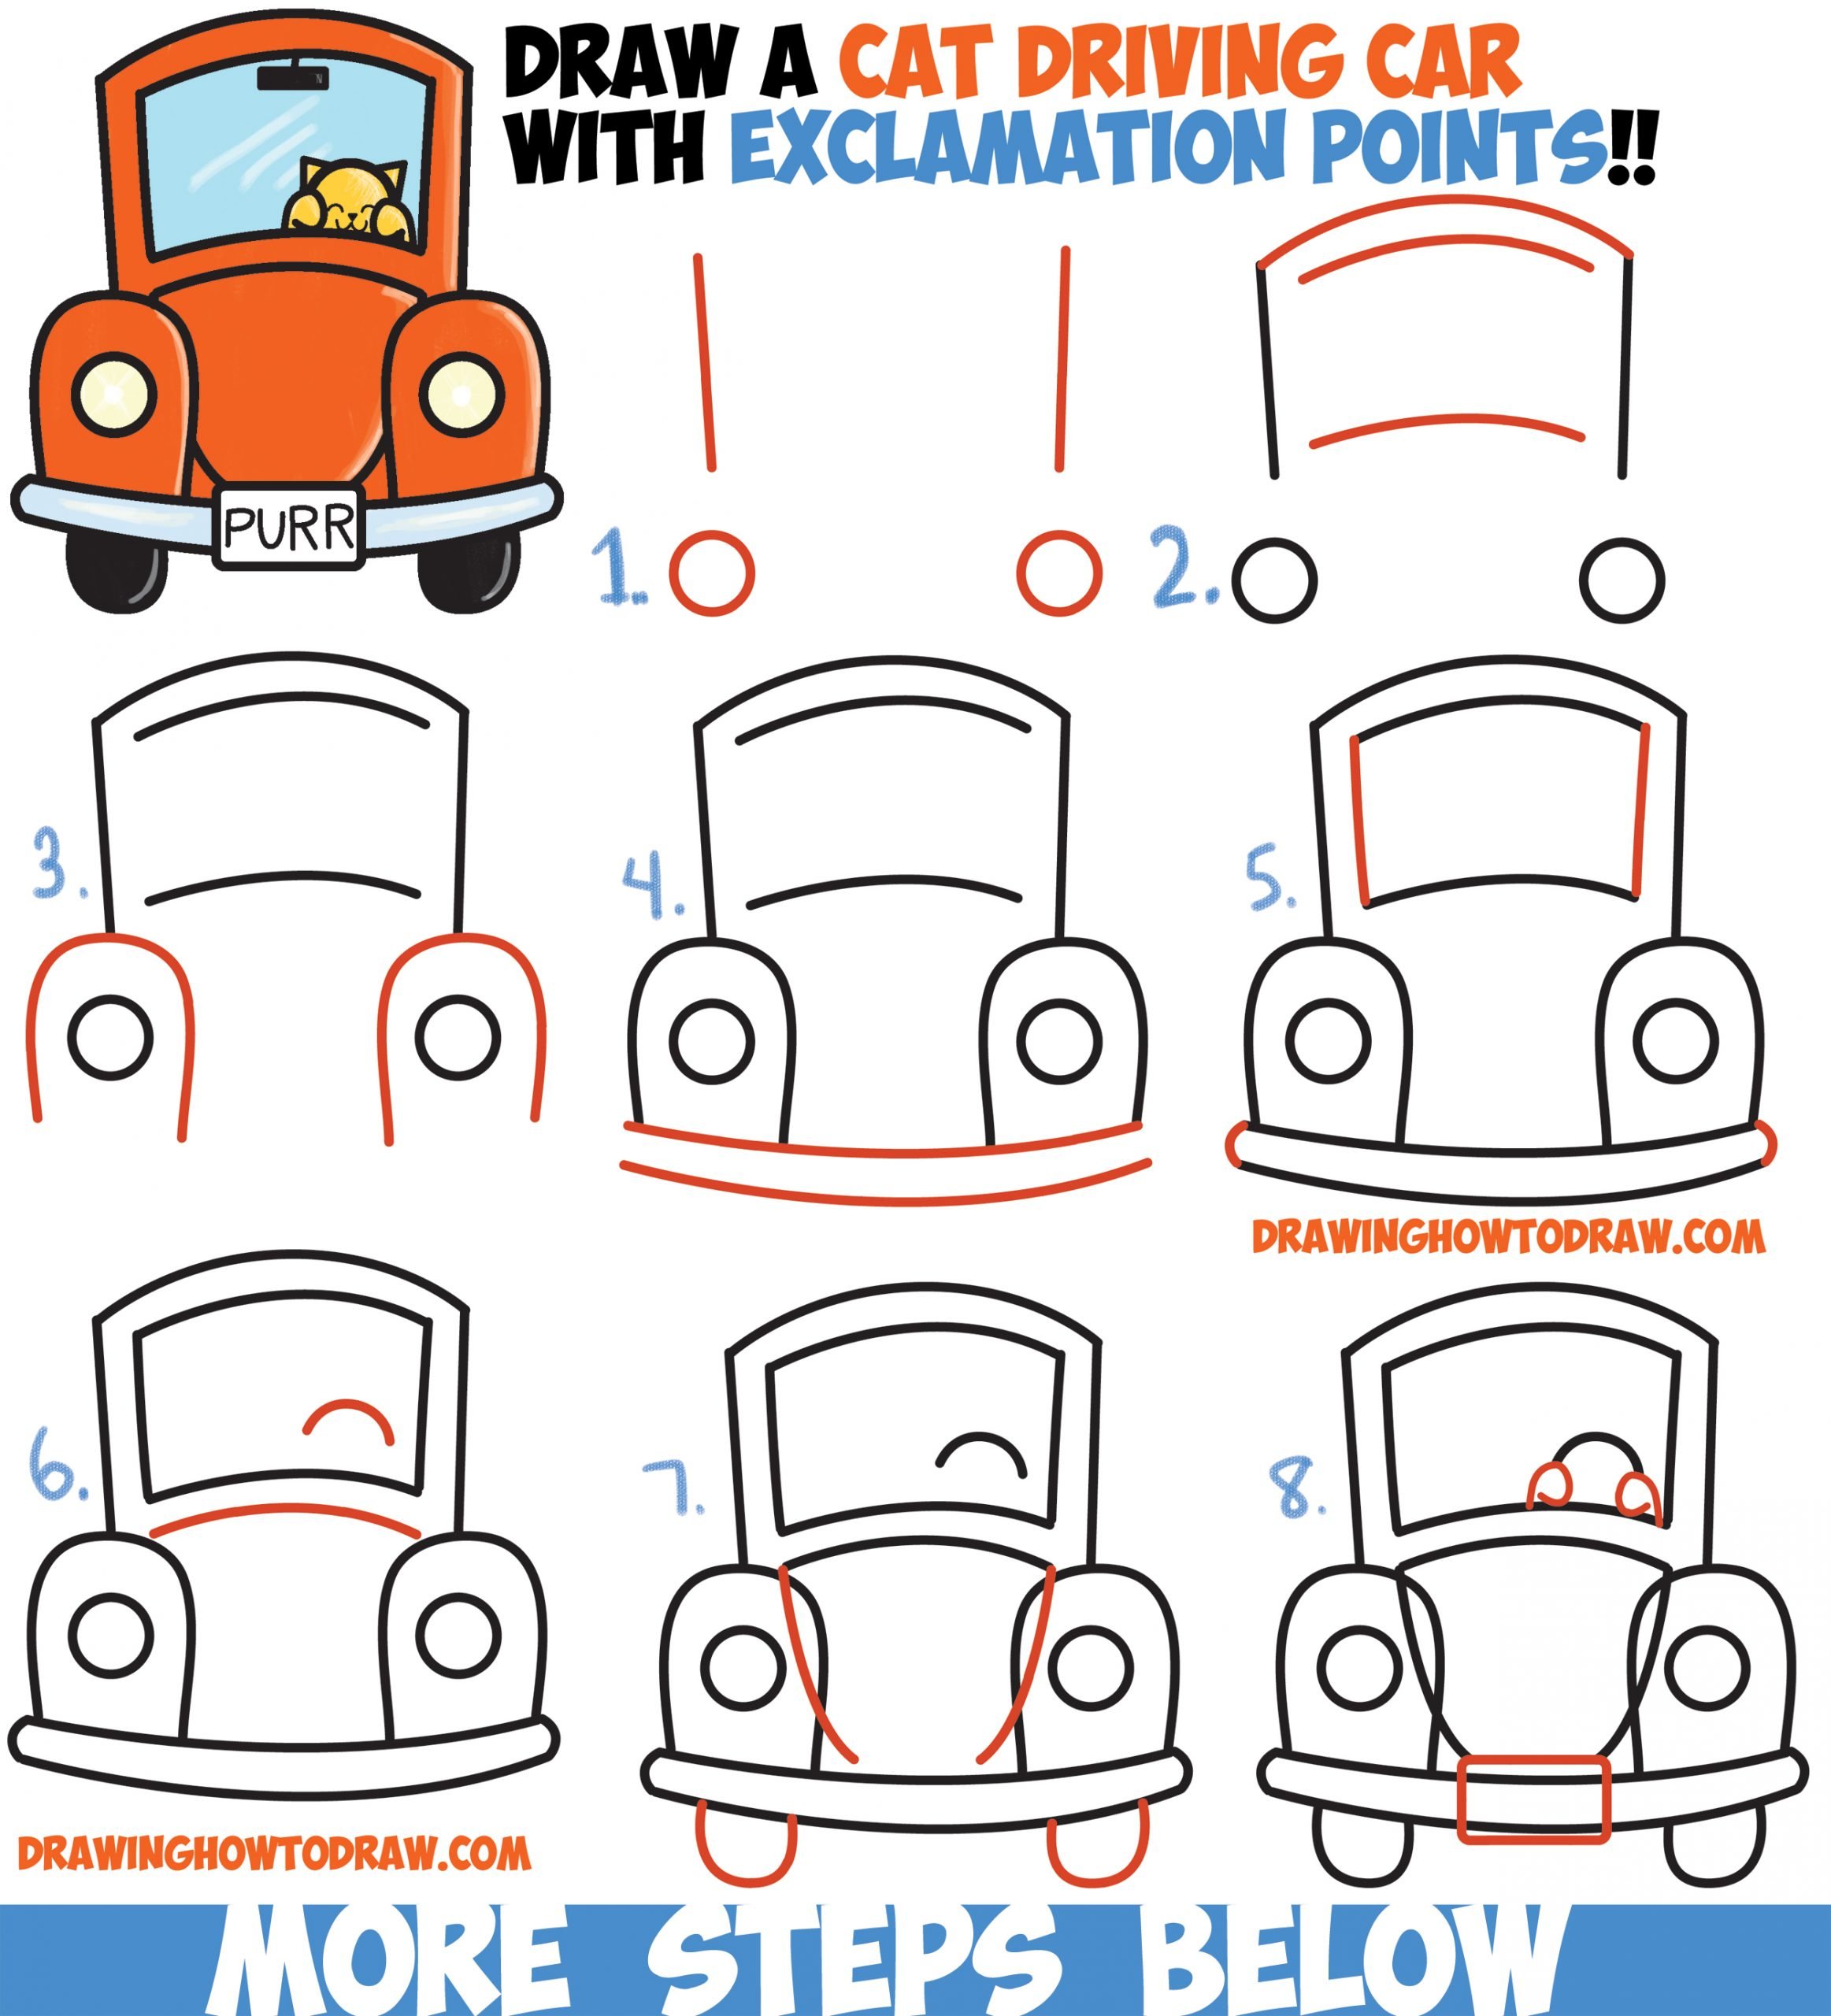 How to Draw Cute Cartoon Cat Driving a Car from ...